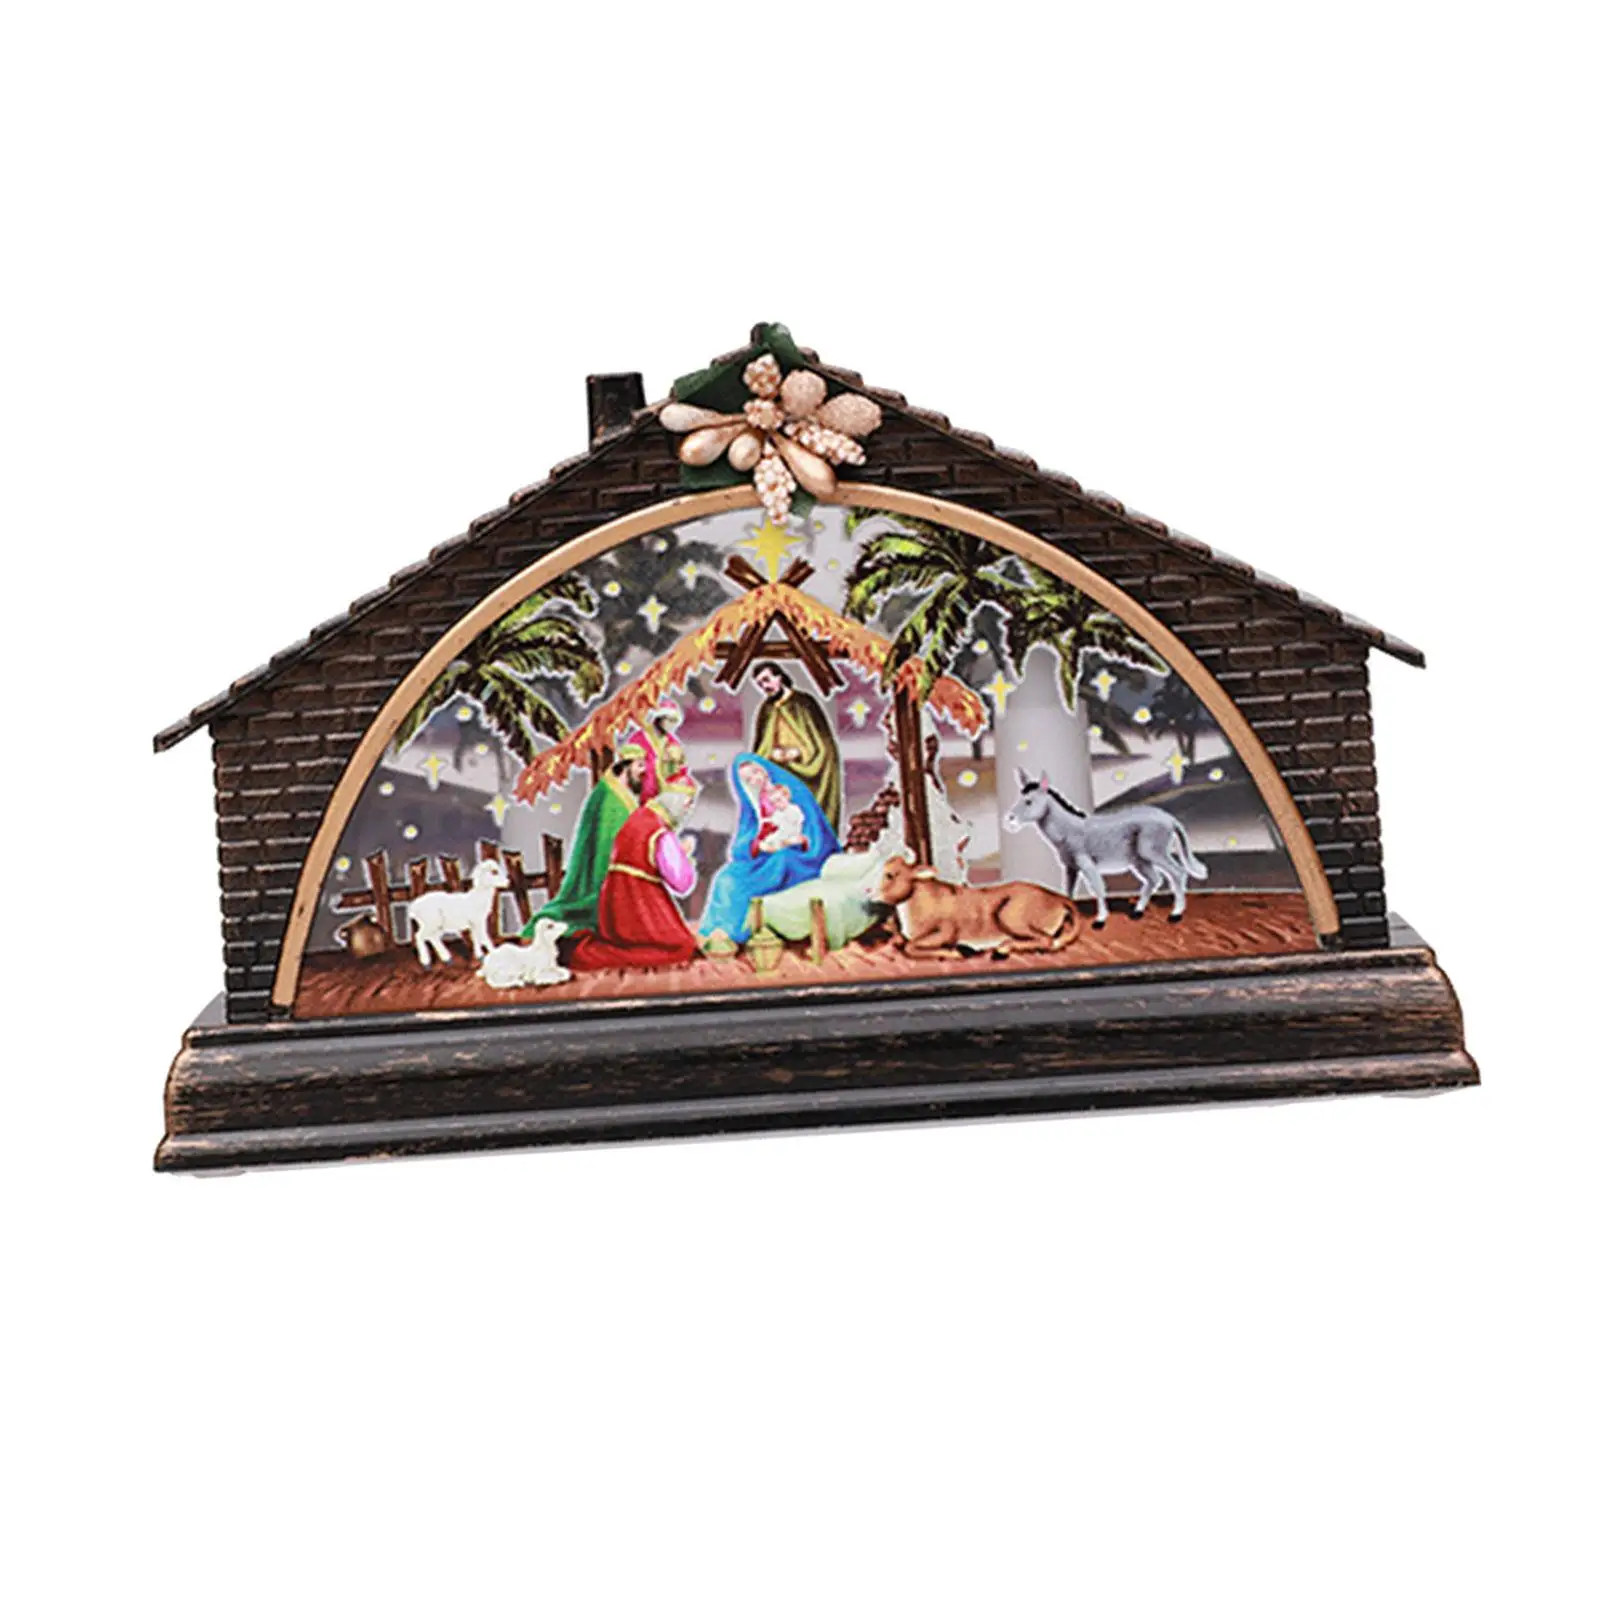 Christmas Lantern Night Light House Holy Family Figurine Battery Powered Lamp for Festival Party Home Decor Birthday Gifts